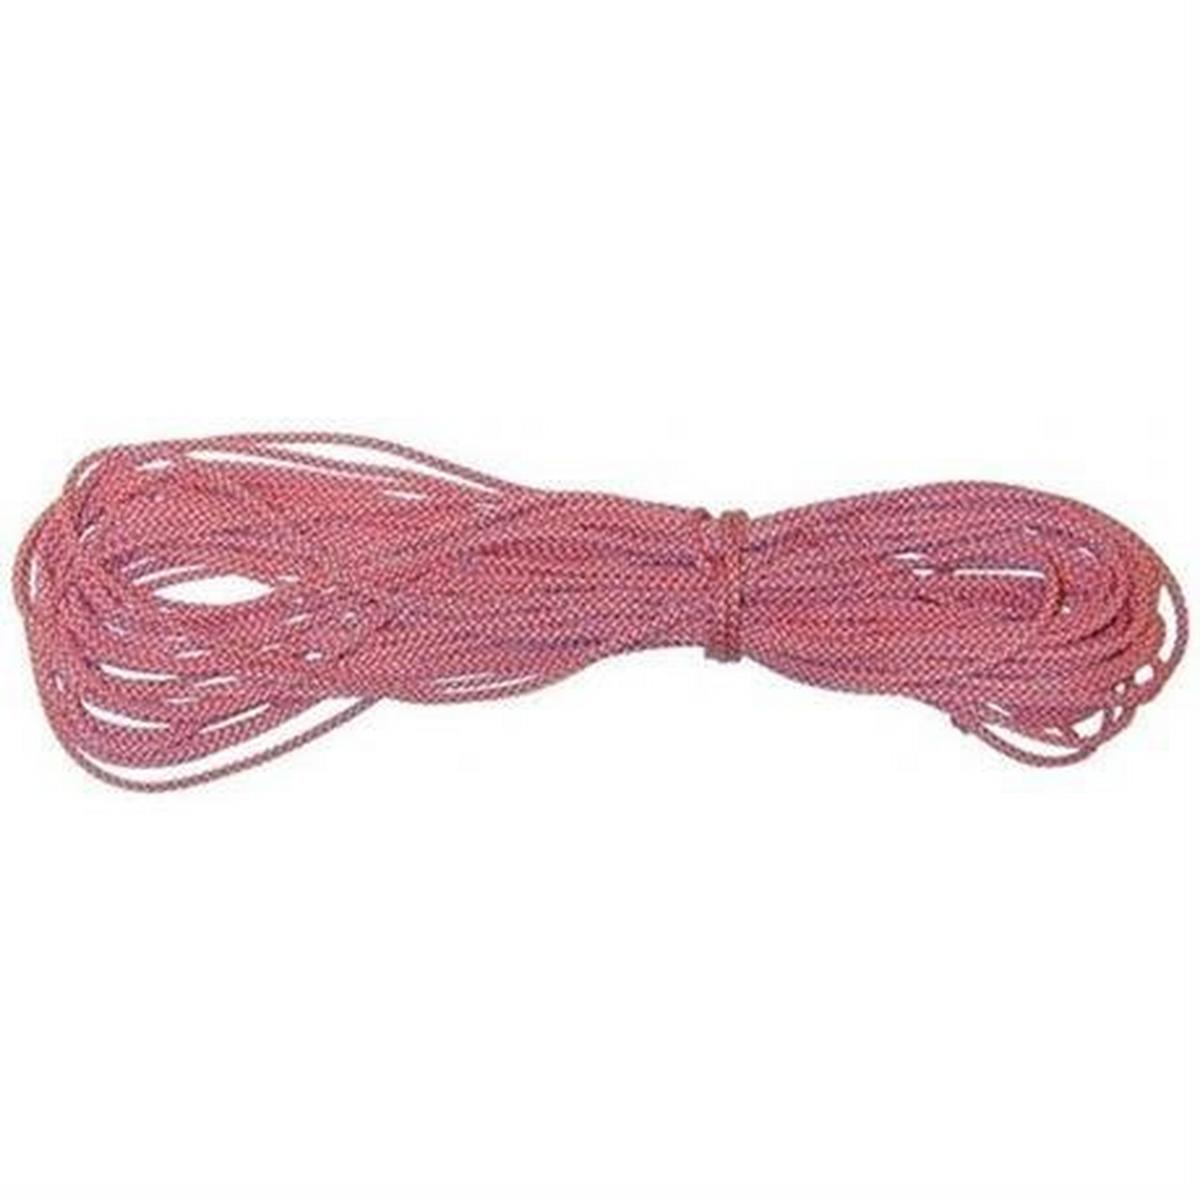 Hilleberg Guy Line Cord 3mm - Red & White Reflective (25m)